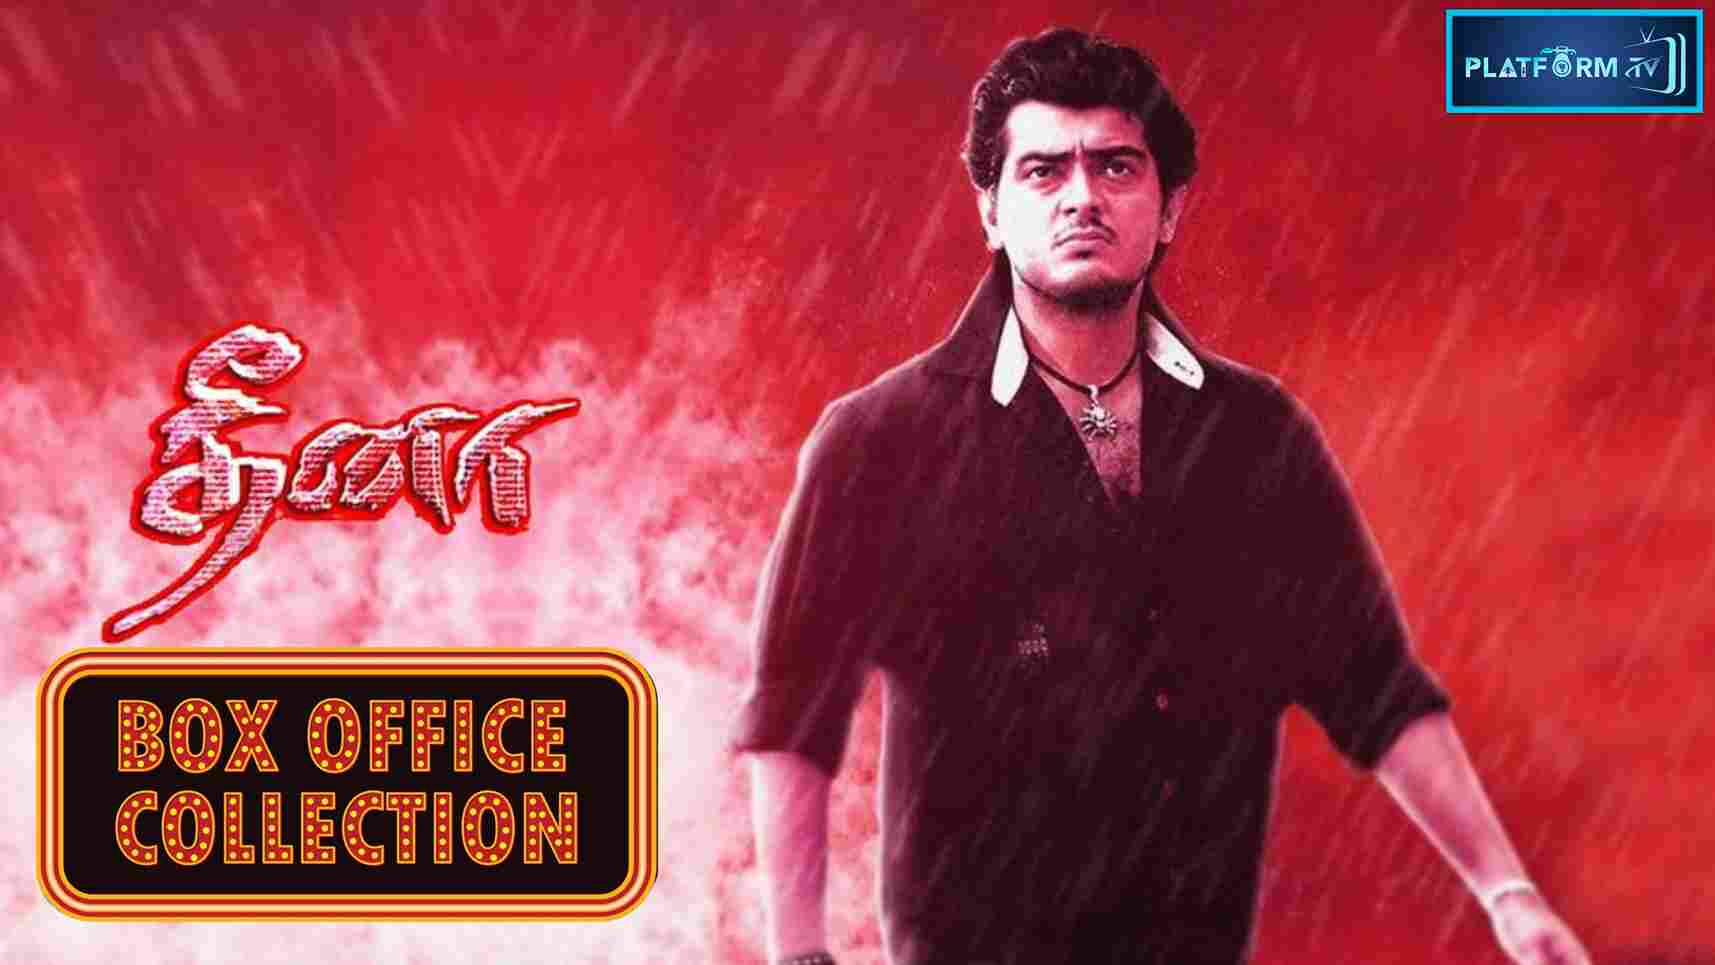 Dheena Re release Collection - Platform Tamil